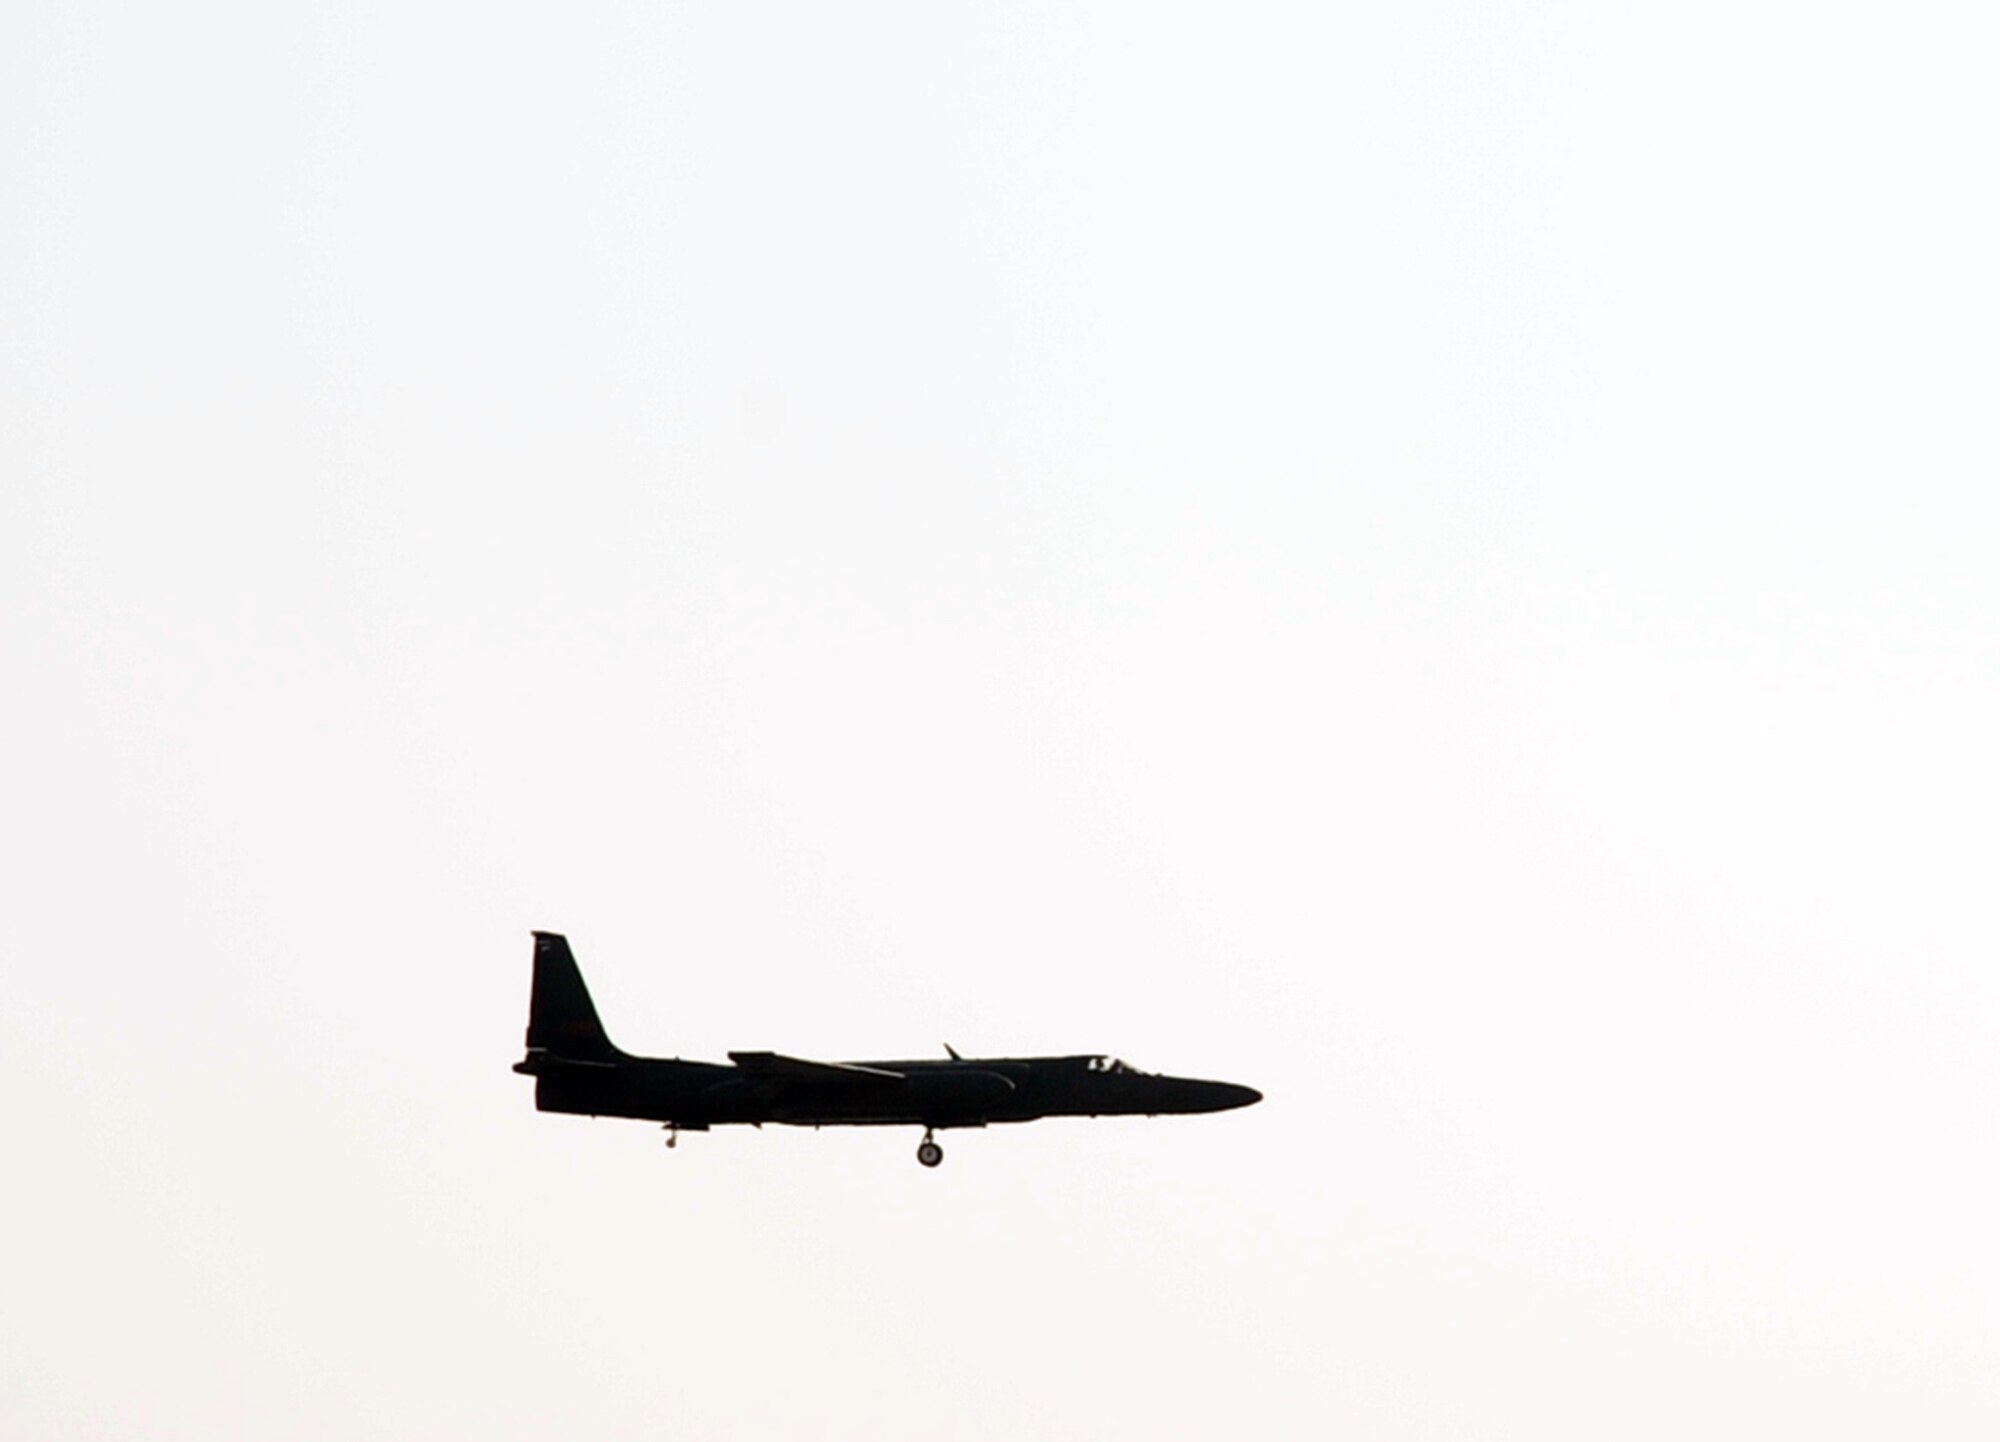 A U-2 Dragon Lady from the 99th Expeditionary Reconnaissance Squadron takes off for a mission Jan. 23, 2010, from a non-disclosed location in Southwest Asia.  On its missions, the U-2 flies as high an altitude as 70,000 feet. The 99th ERS, part of the 380th Air Expeditionary Wing, supports Operations Iraqi Freedom and Enduring Freedom and the Combined Joint Task Force-Horn of Africa. (U.S. Air Force Photo/Tech. Sgt. Scott T. Sturkol/Released)